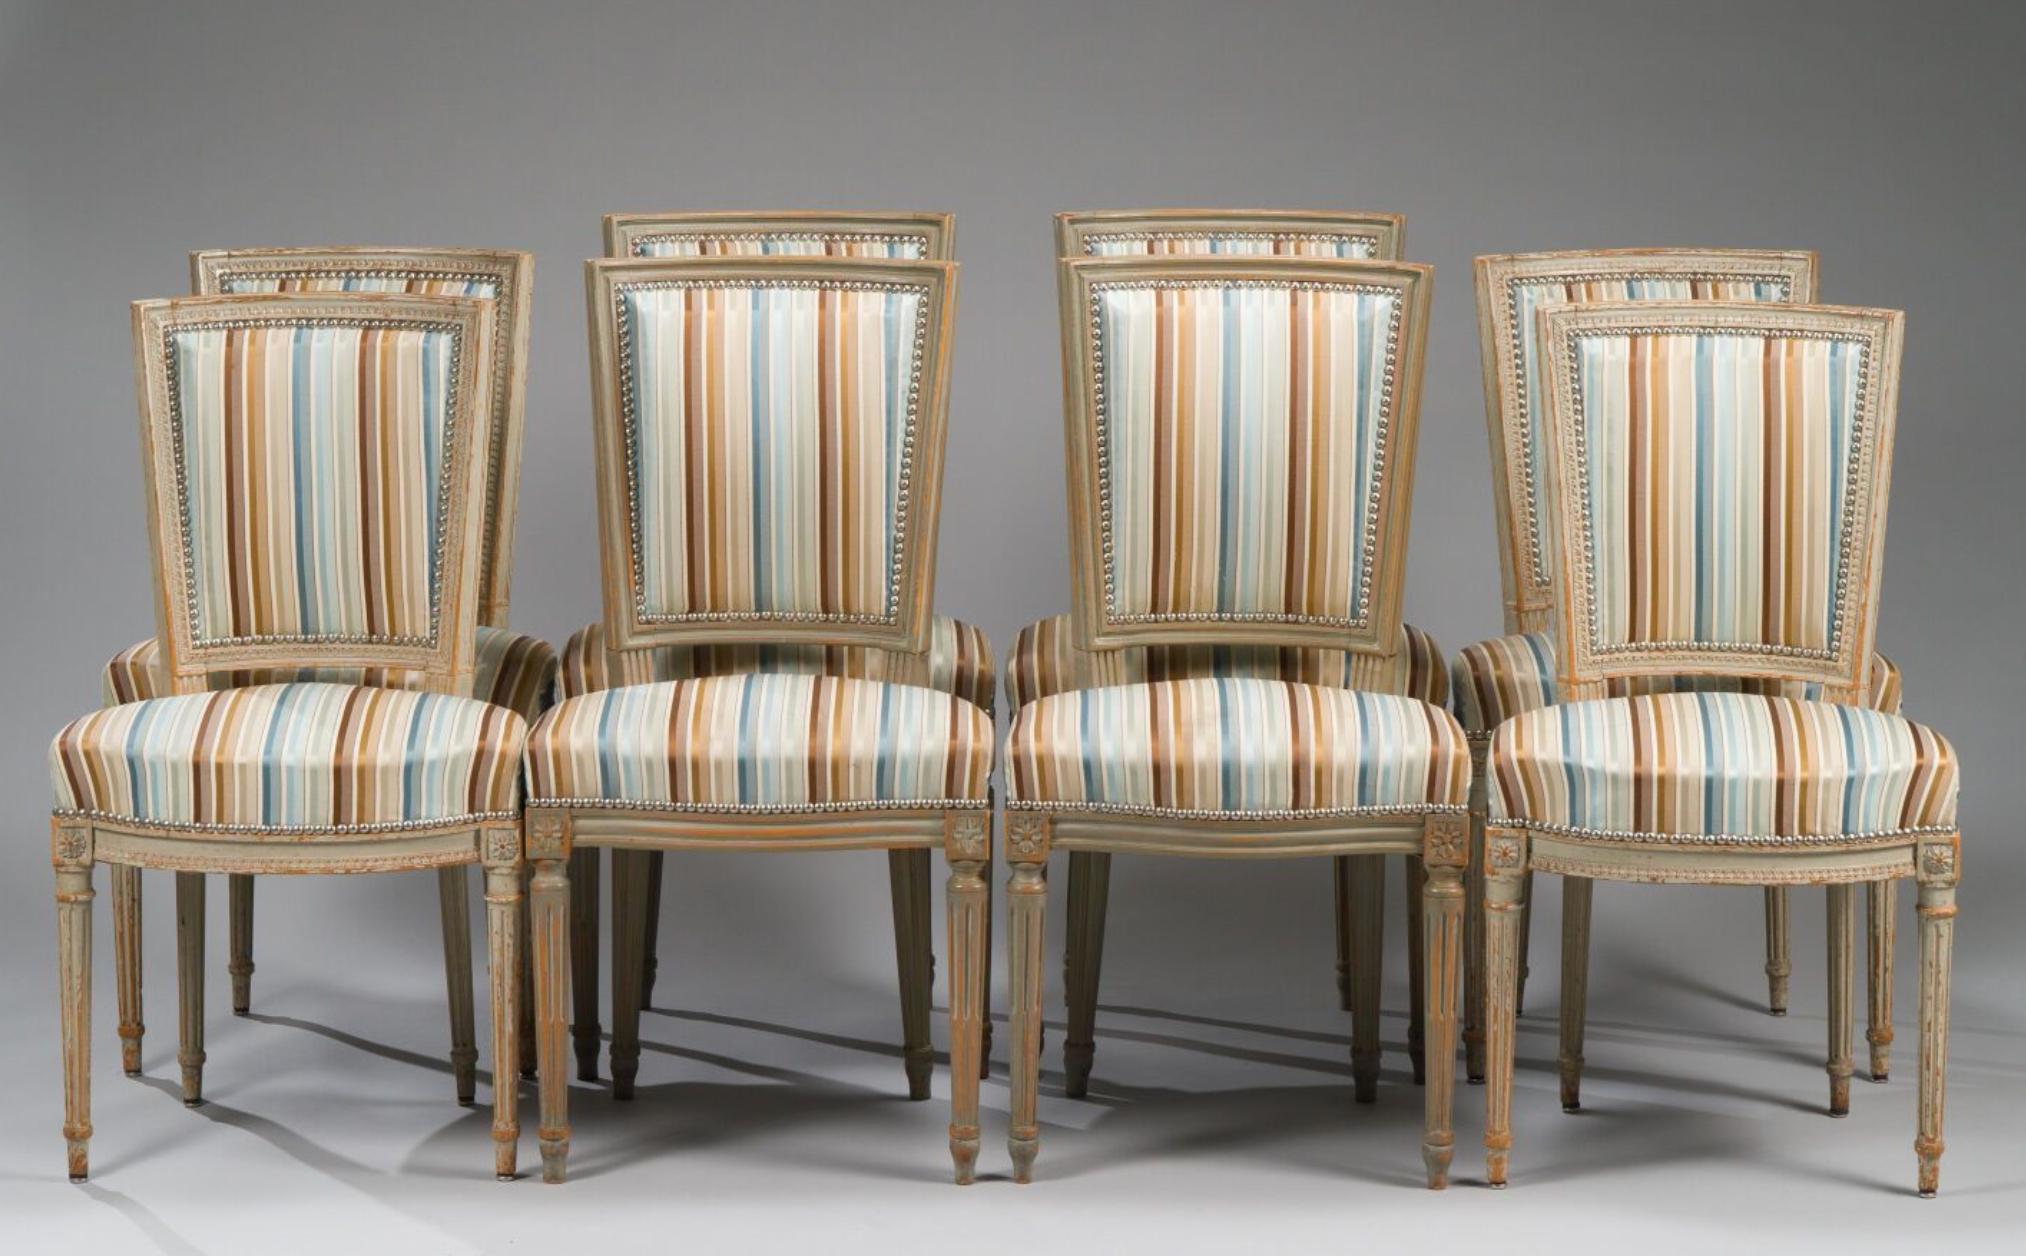 19th Century French eight hand carved dining chairs in Louis XVI style. All the chairs are in very good authentic condition and still wearing original silk upholstery.
France, circa 1880